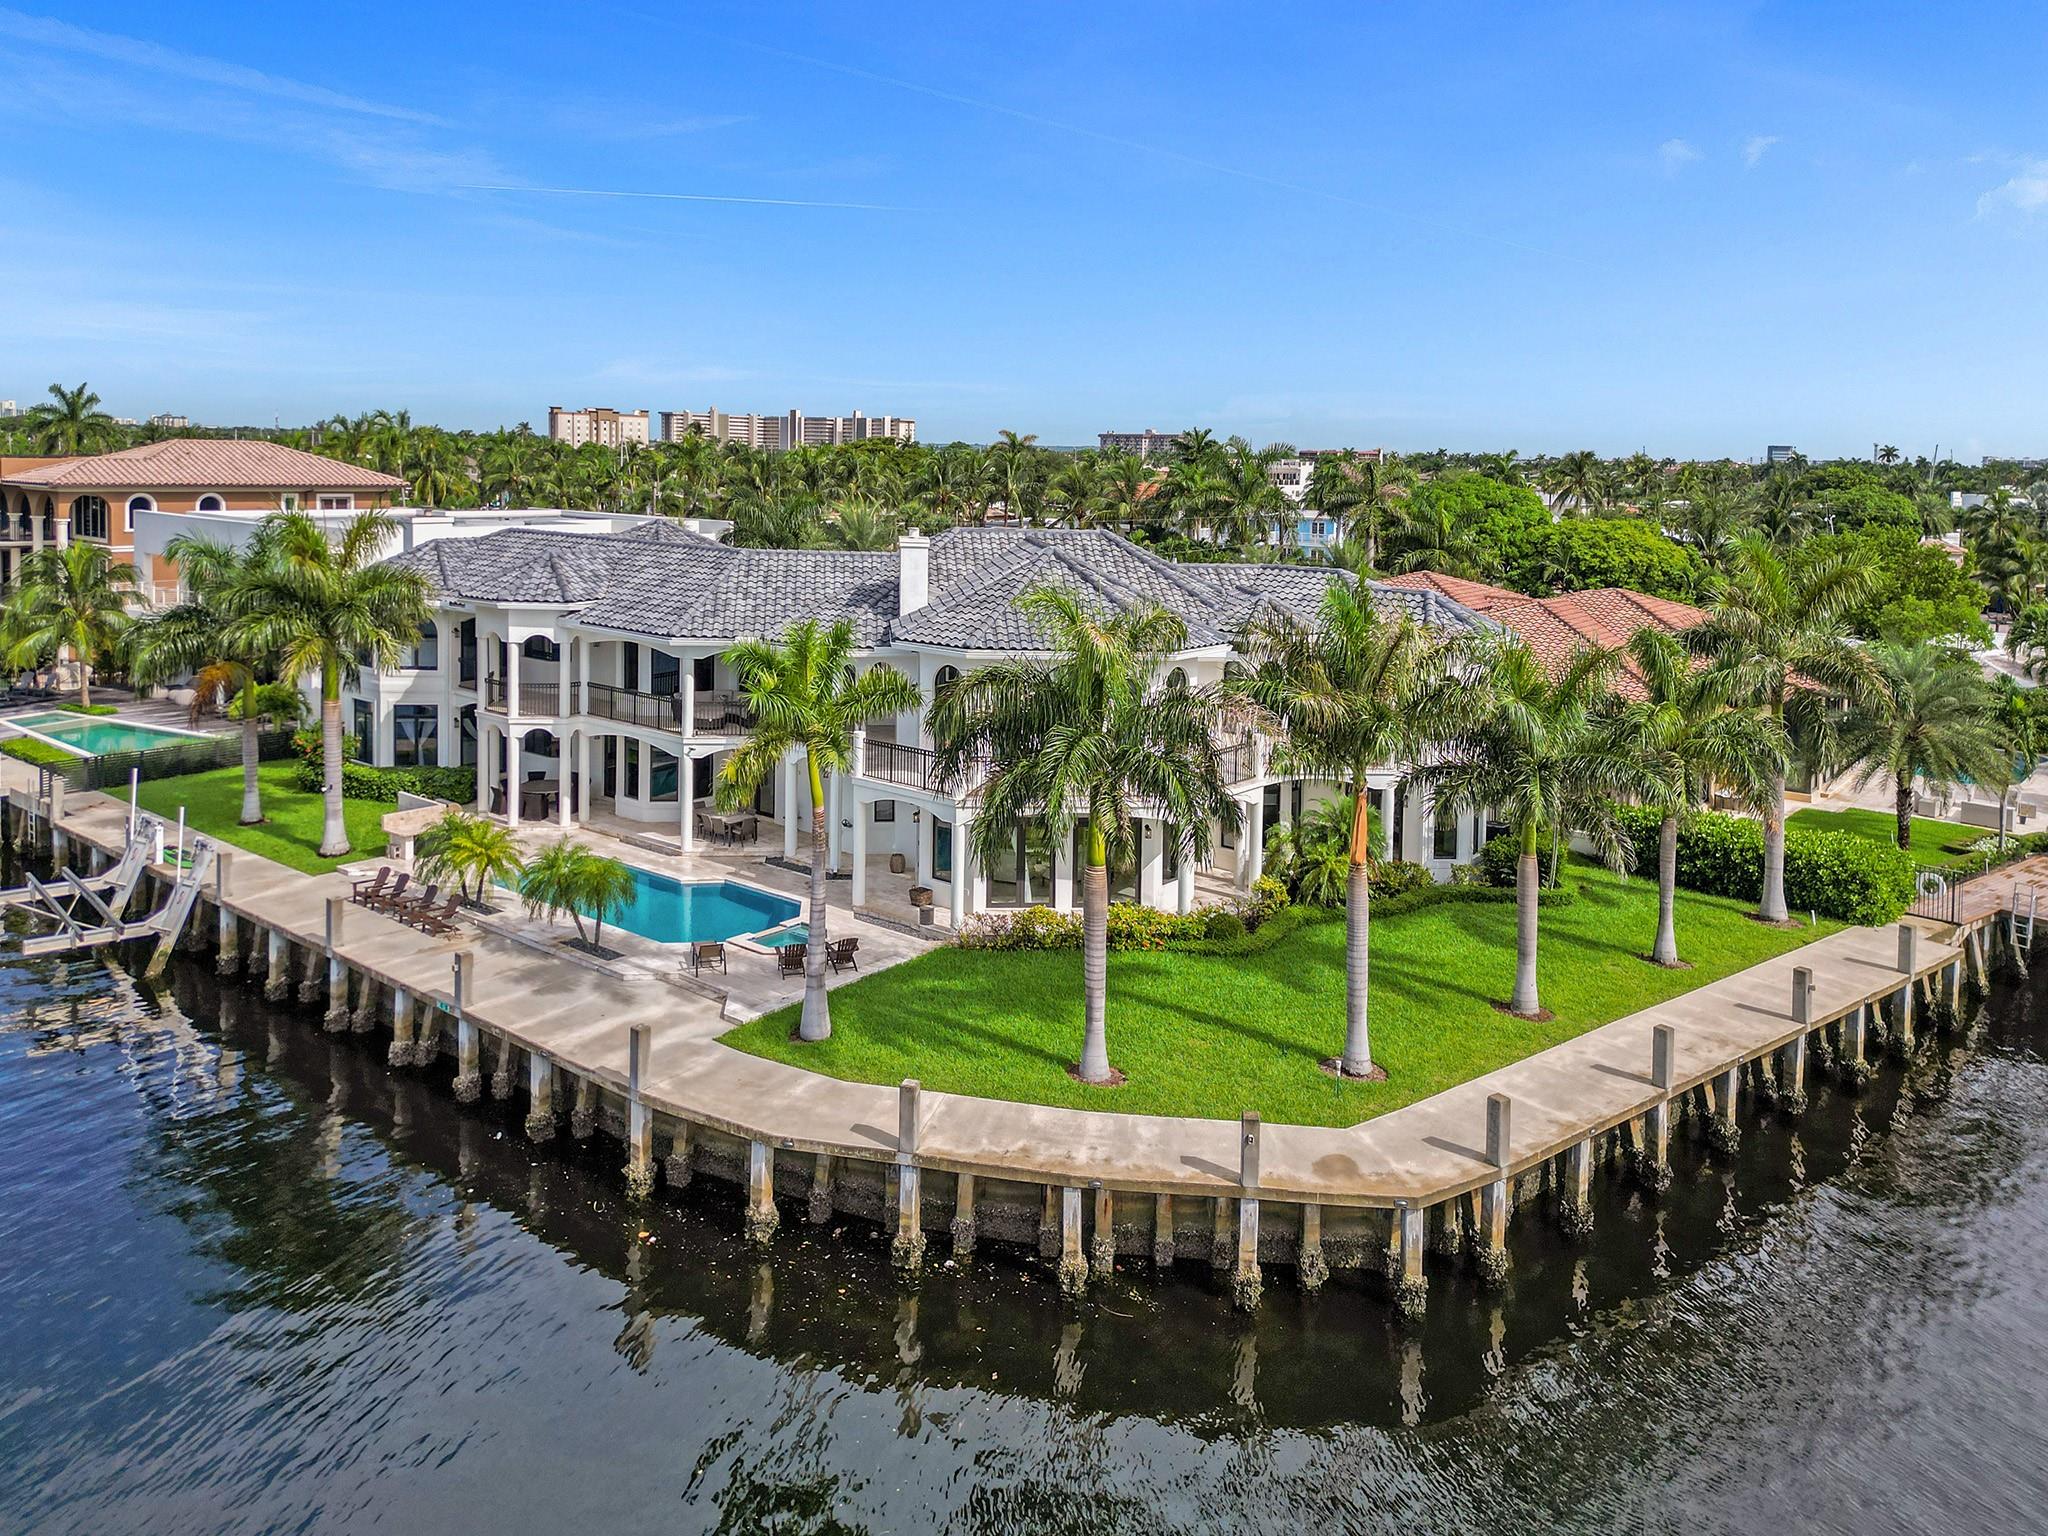 We Are Proud To Offer & Represent This Elegantly Remastered Luxury Direct Intracoastal Home! From the time one approaches the grand entrance, gorgeous dramatic dueling staircases & a catwalk greet, soaring ceilings, incredible natural light, a perfect blend of beauty, vast space to relax or entertain with & sophistication await! The open & airy catwalk allows for continued lighting & as one walks farther in, this home offers a sweeping south by southeast views, across the generous pool/spa/summer kitchen deck, 220' of deepwater frontage appointed w/a newer concrete dock & seawall & a boat parade every day. The generous 6 bed, 5 full baths & 1 half bath floorplan can accommodate your family & guests with great views from almost every room. Close to the beach/inlet, entertainment & more!